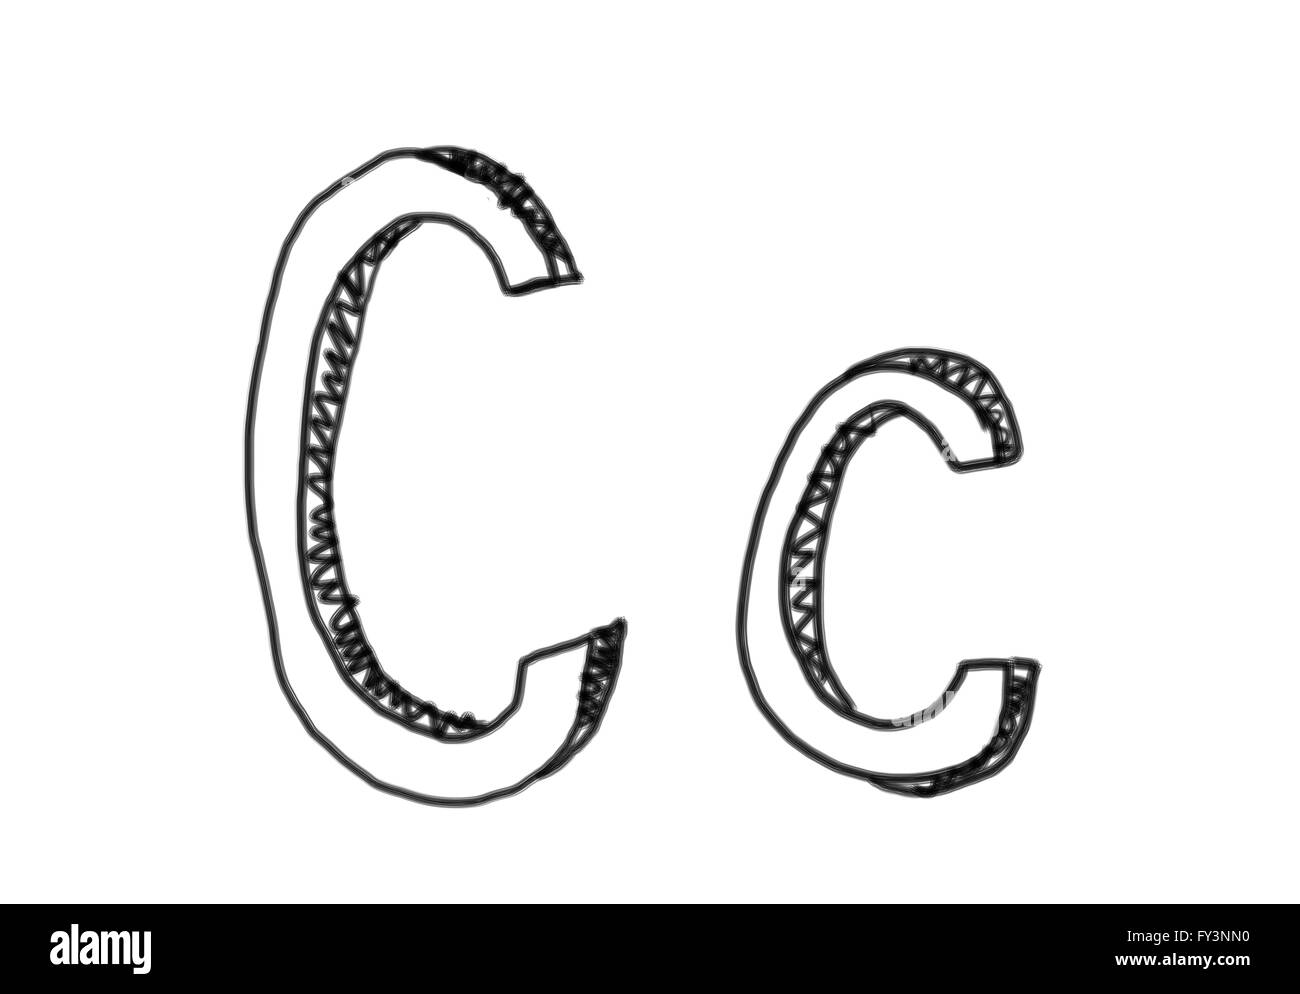 New drawing Character C of alphabet logo icon in design elements. Stock Photo